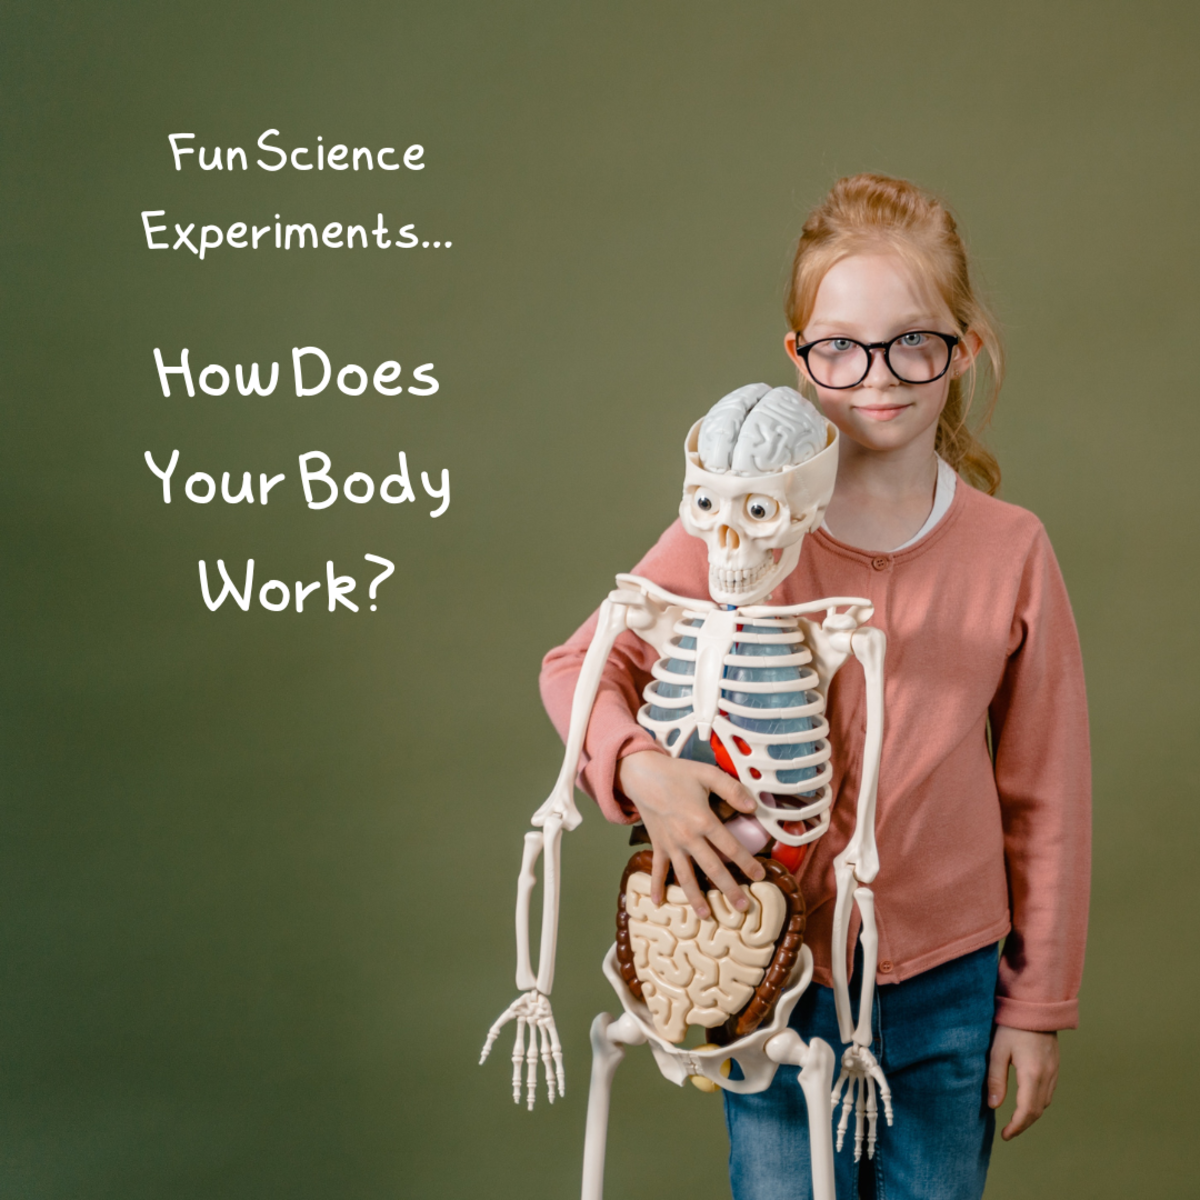 5 Fun Science Experiments About the Human Body for Kids